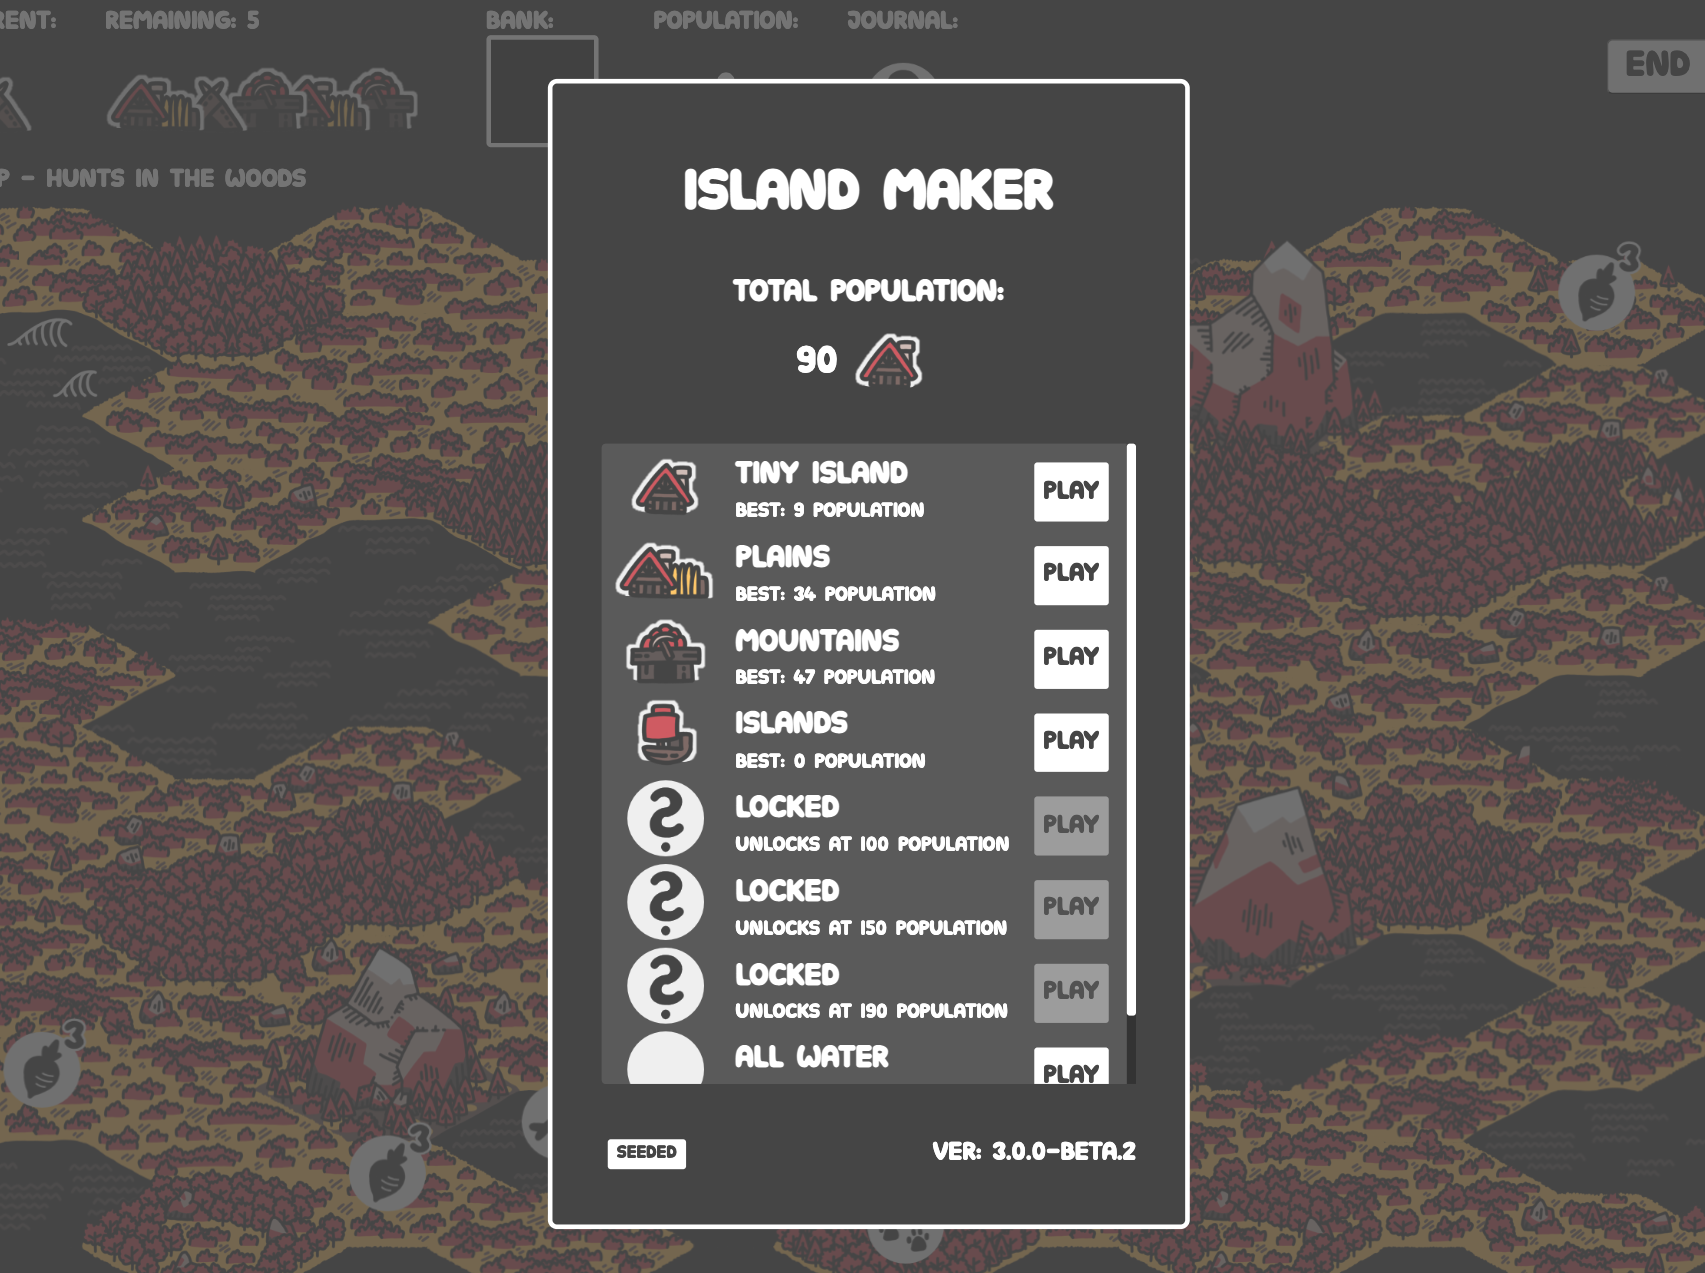 level selection screen showing old levels